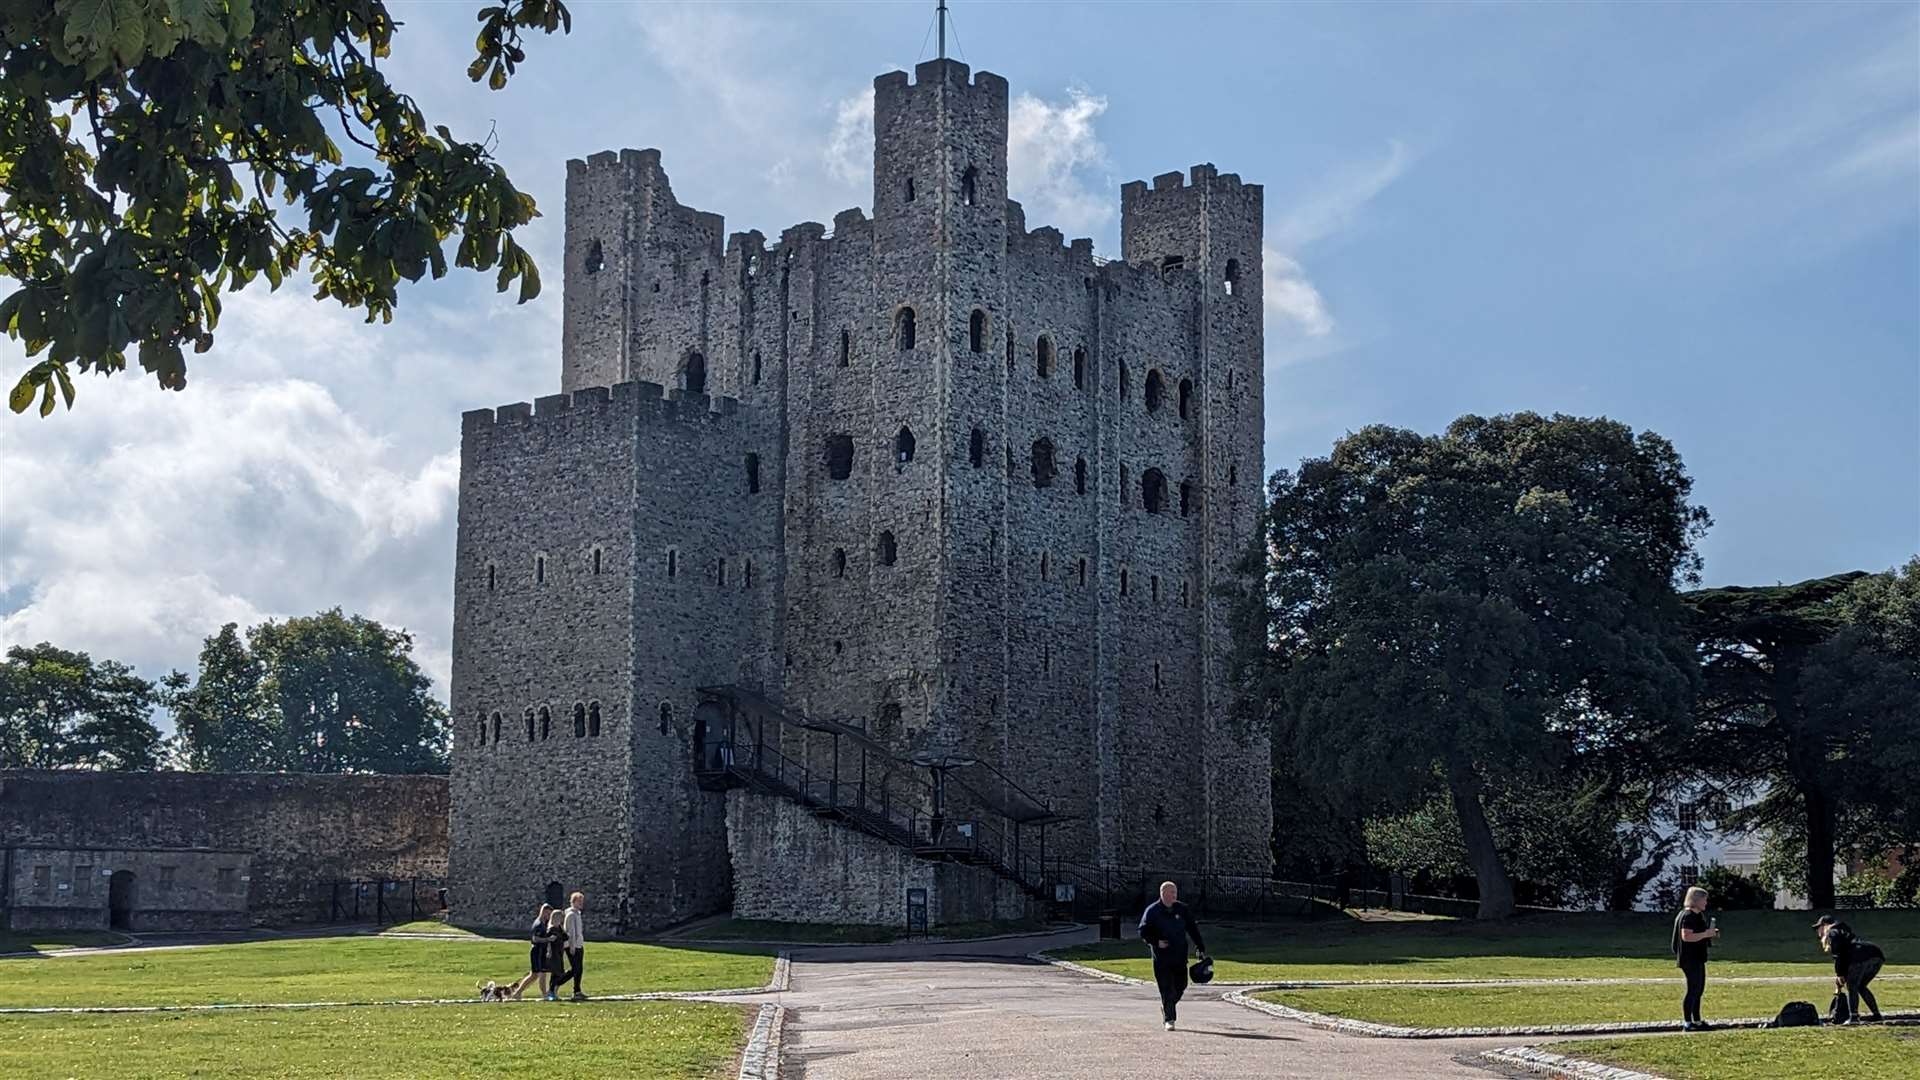 The keep of Rochester Castle